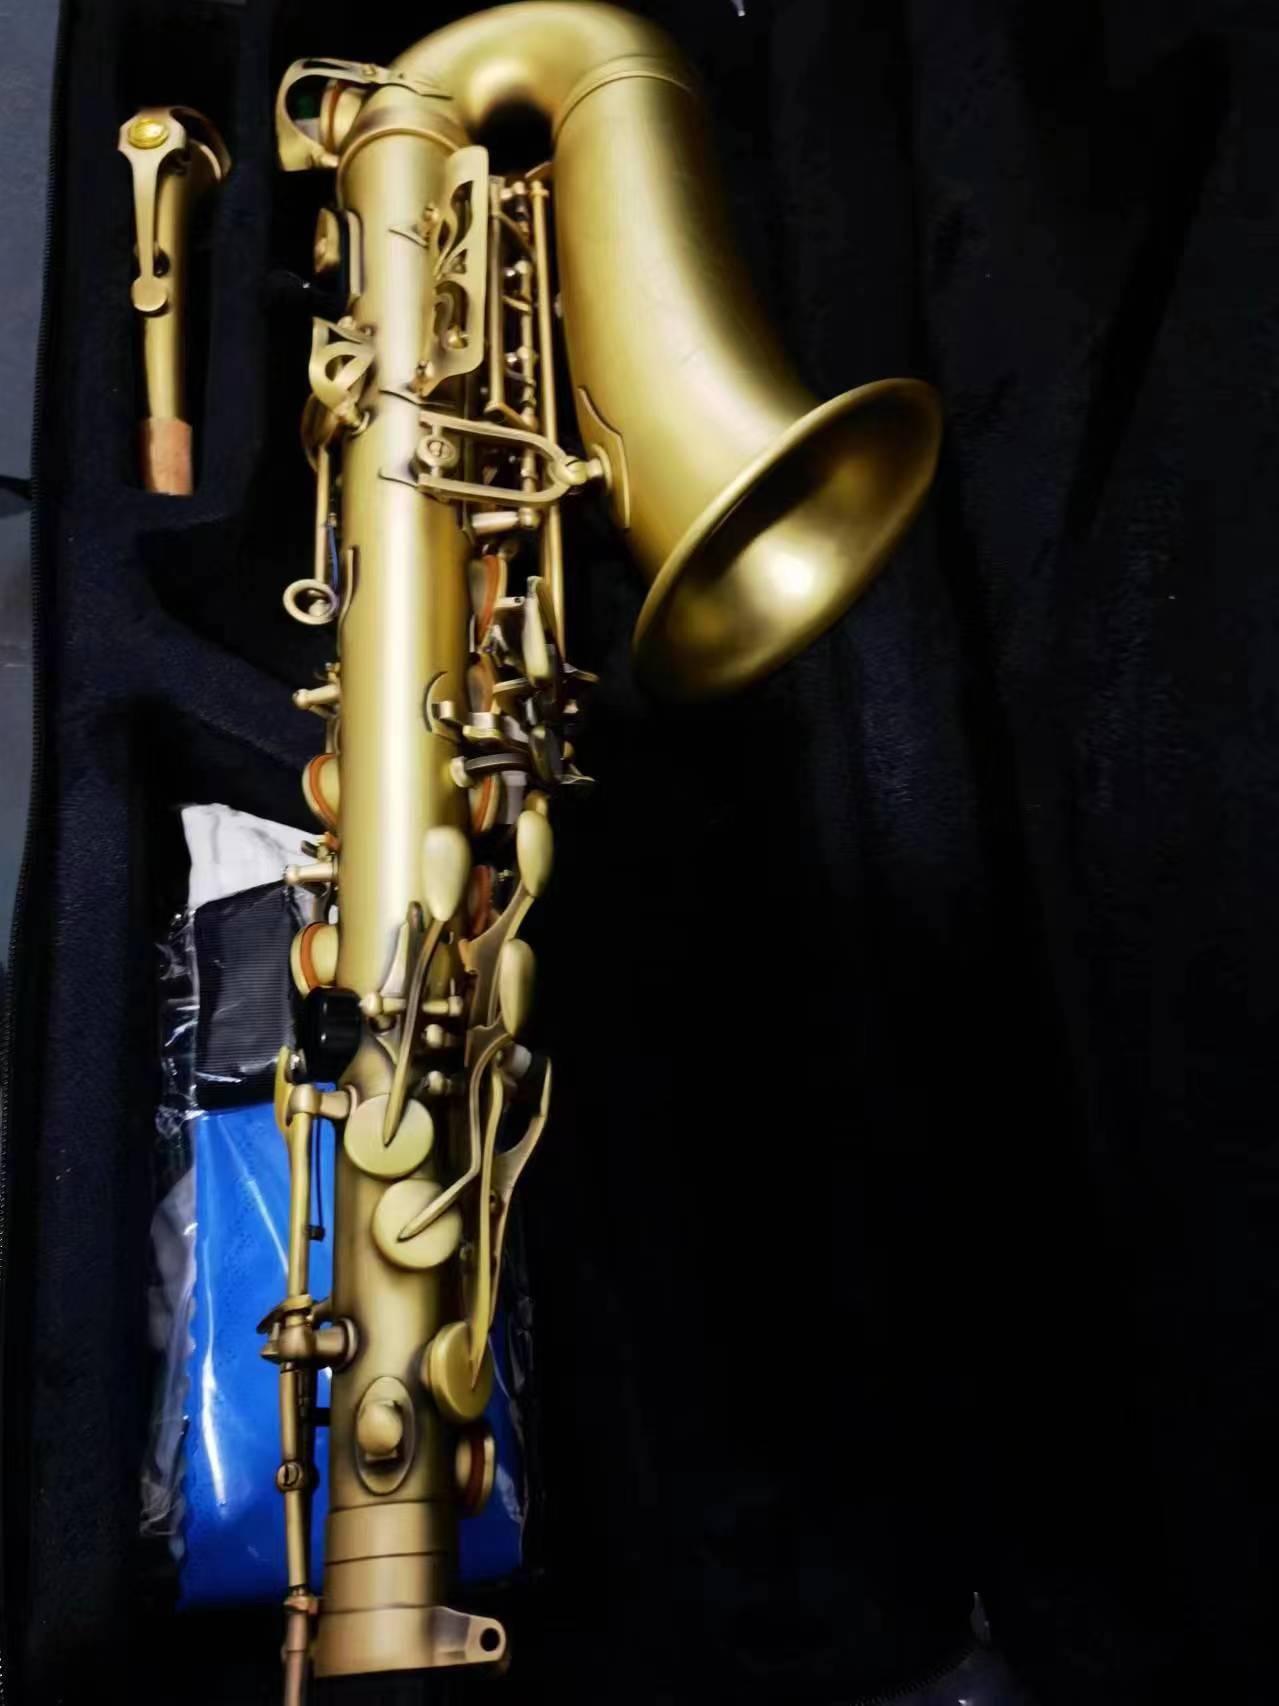 New Alto Sax Reference Brass Saxophone Antique brushed satin finish YAS-62 Model Professional musical instruments Sax